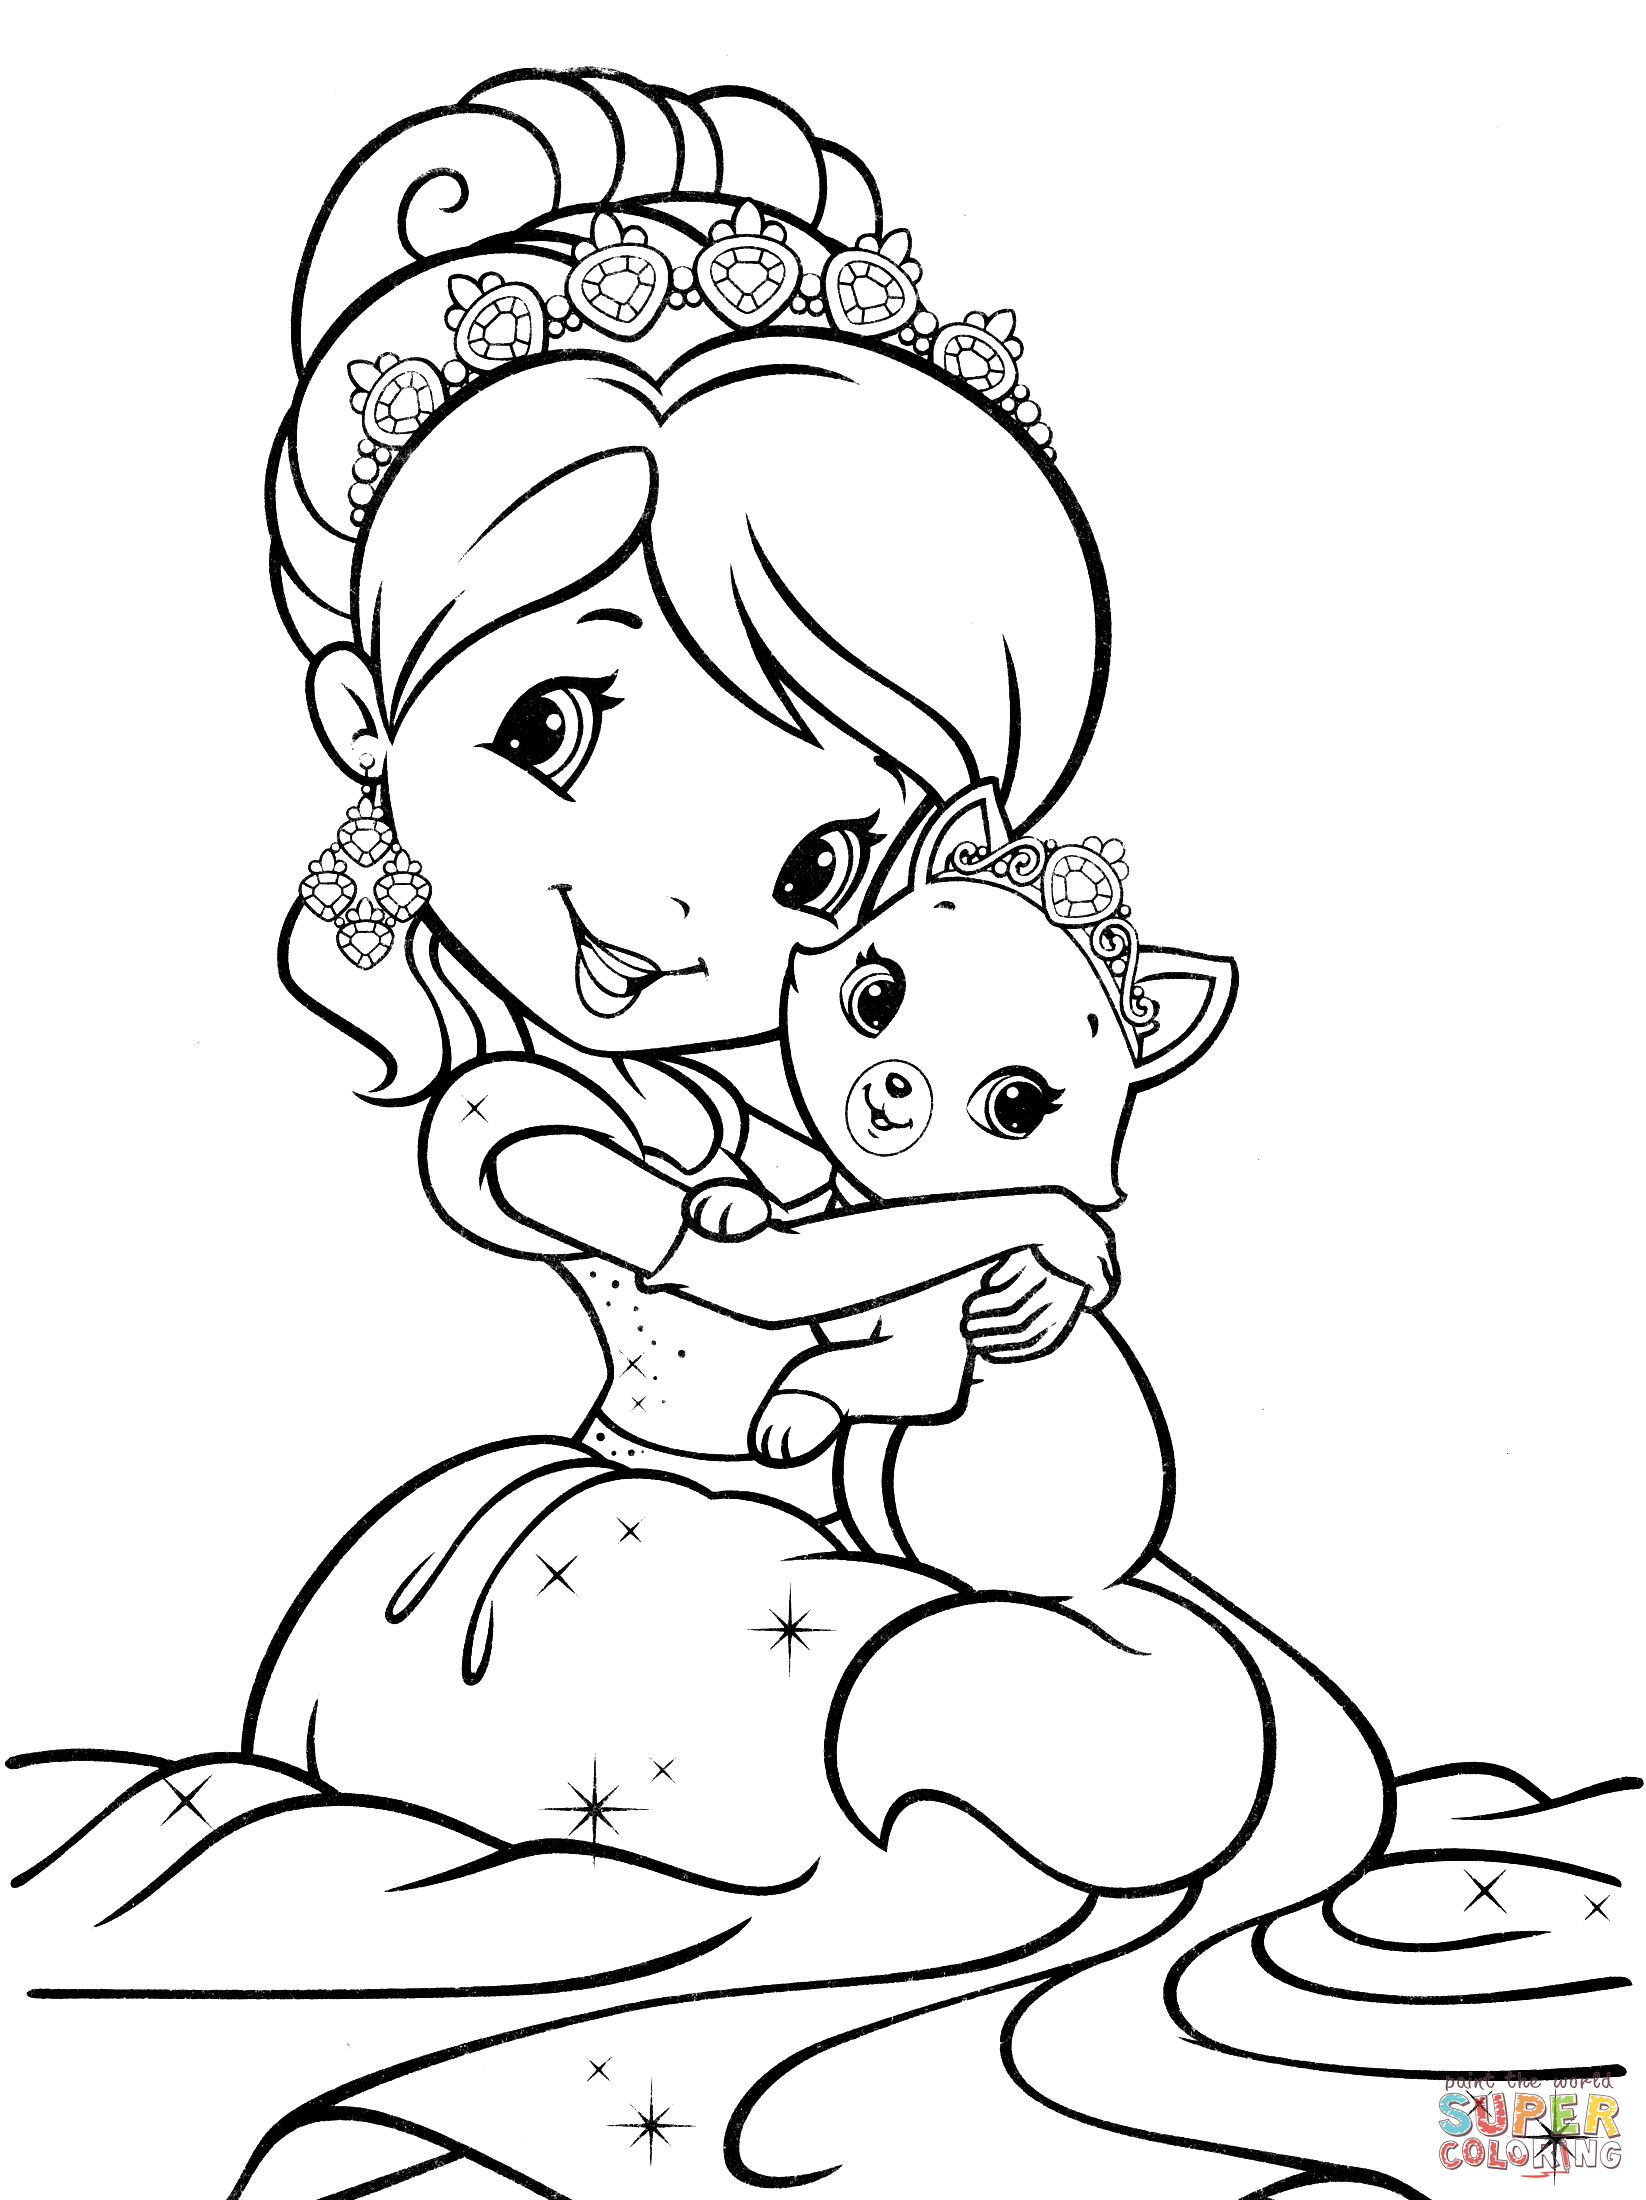 Strawberry Shortcake Printable Coloring Pages
 Strawberry Shortcake Mermaid coloring page